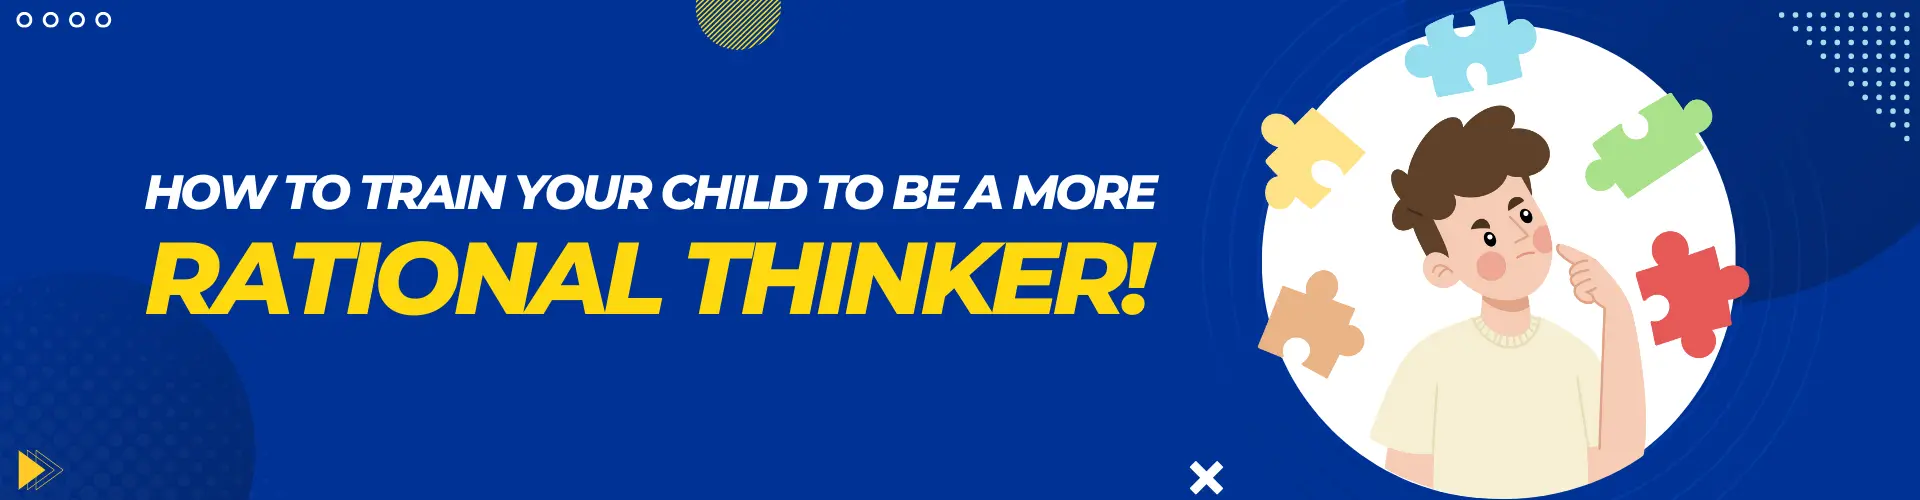 train child to be a rational thinker